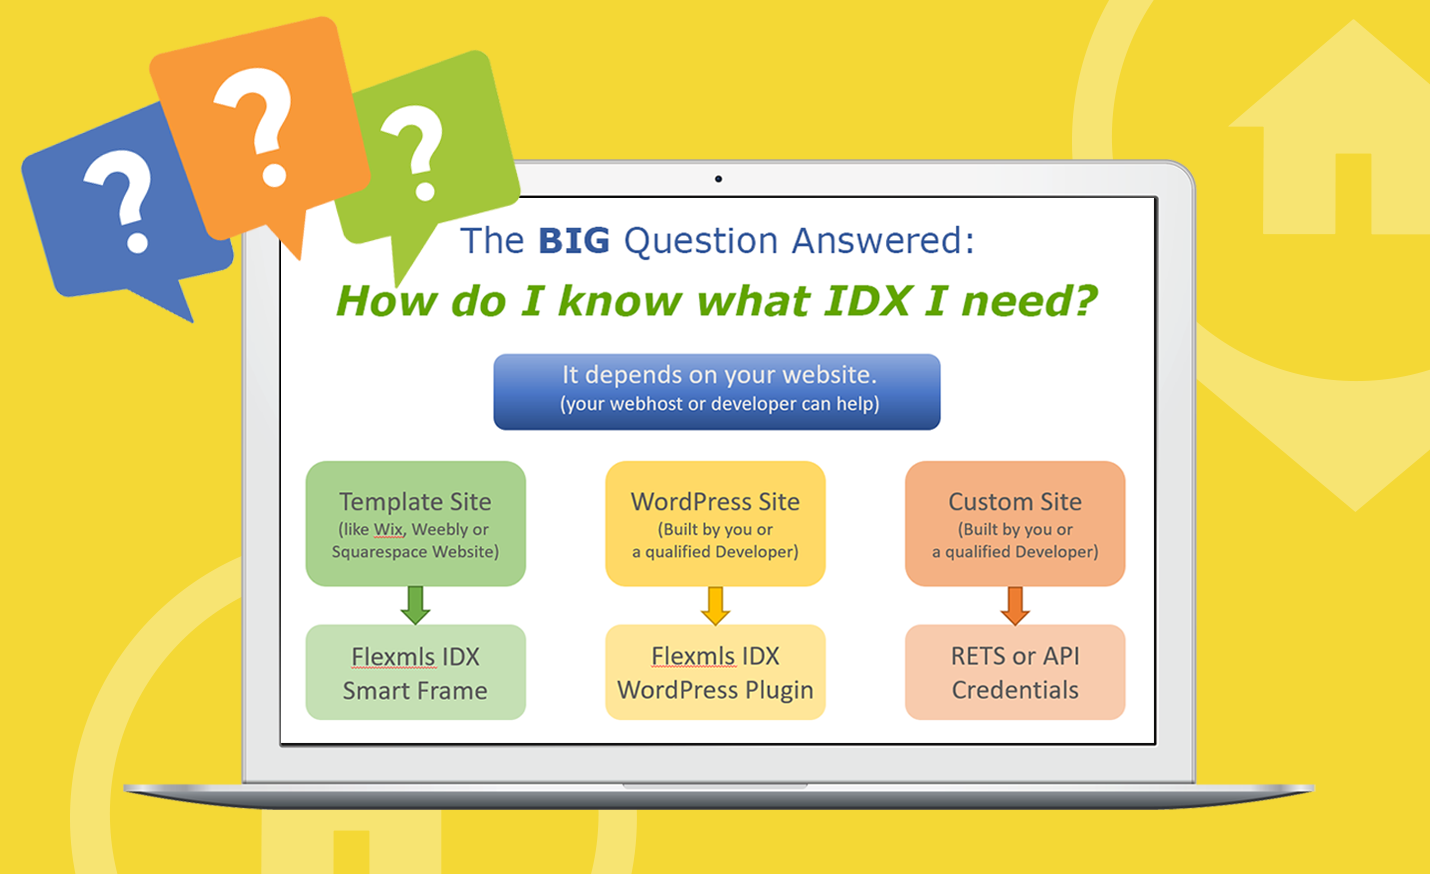 How do I know which IDX format I need